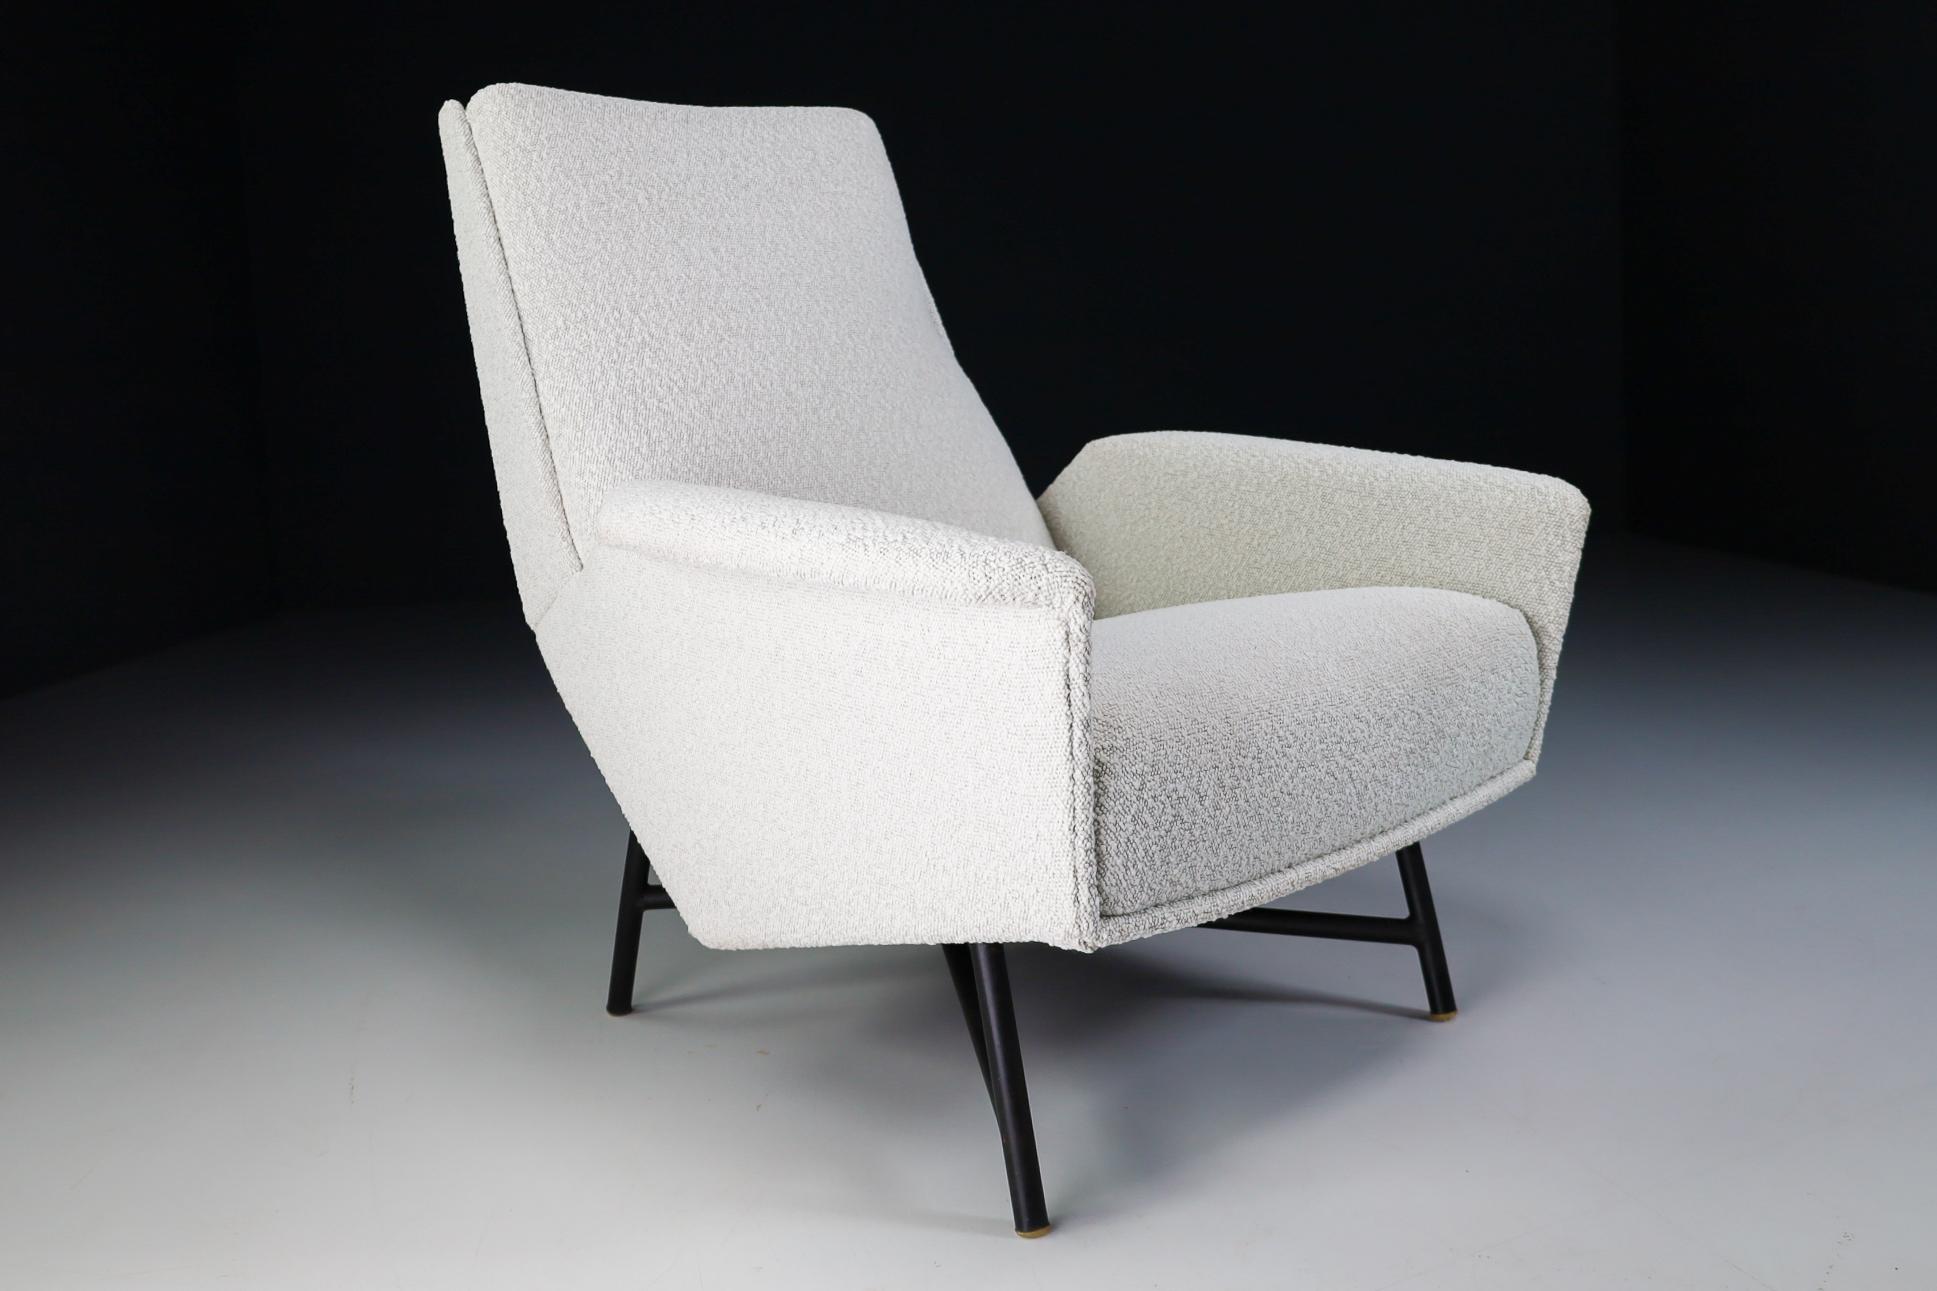 Midcentury Modern Lounge Chair in Re Upholstered Boucle Wool by Guy Besnard 1959 For Sale 1